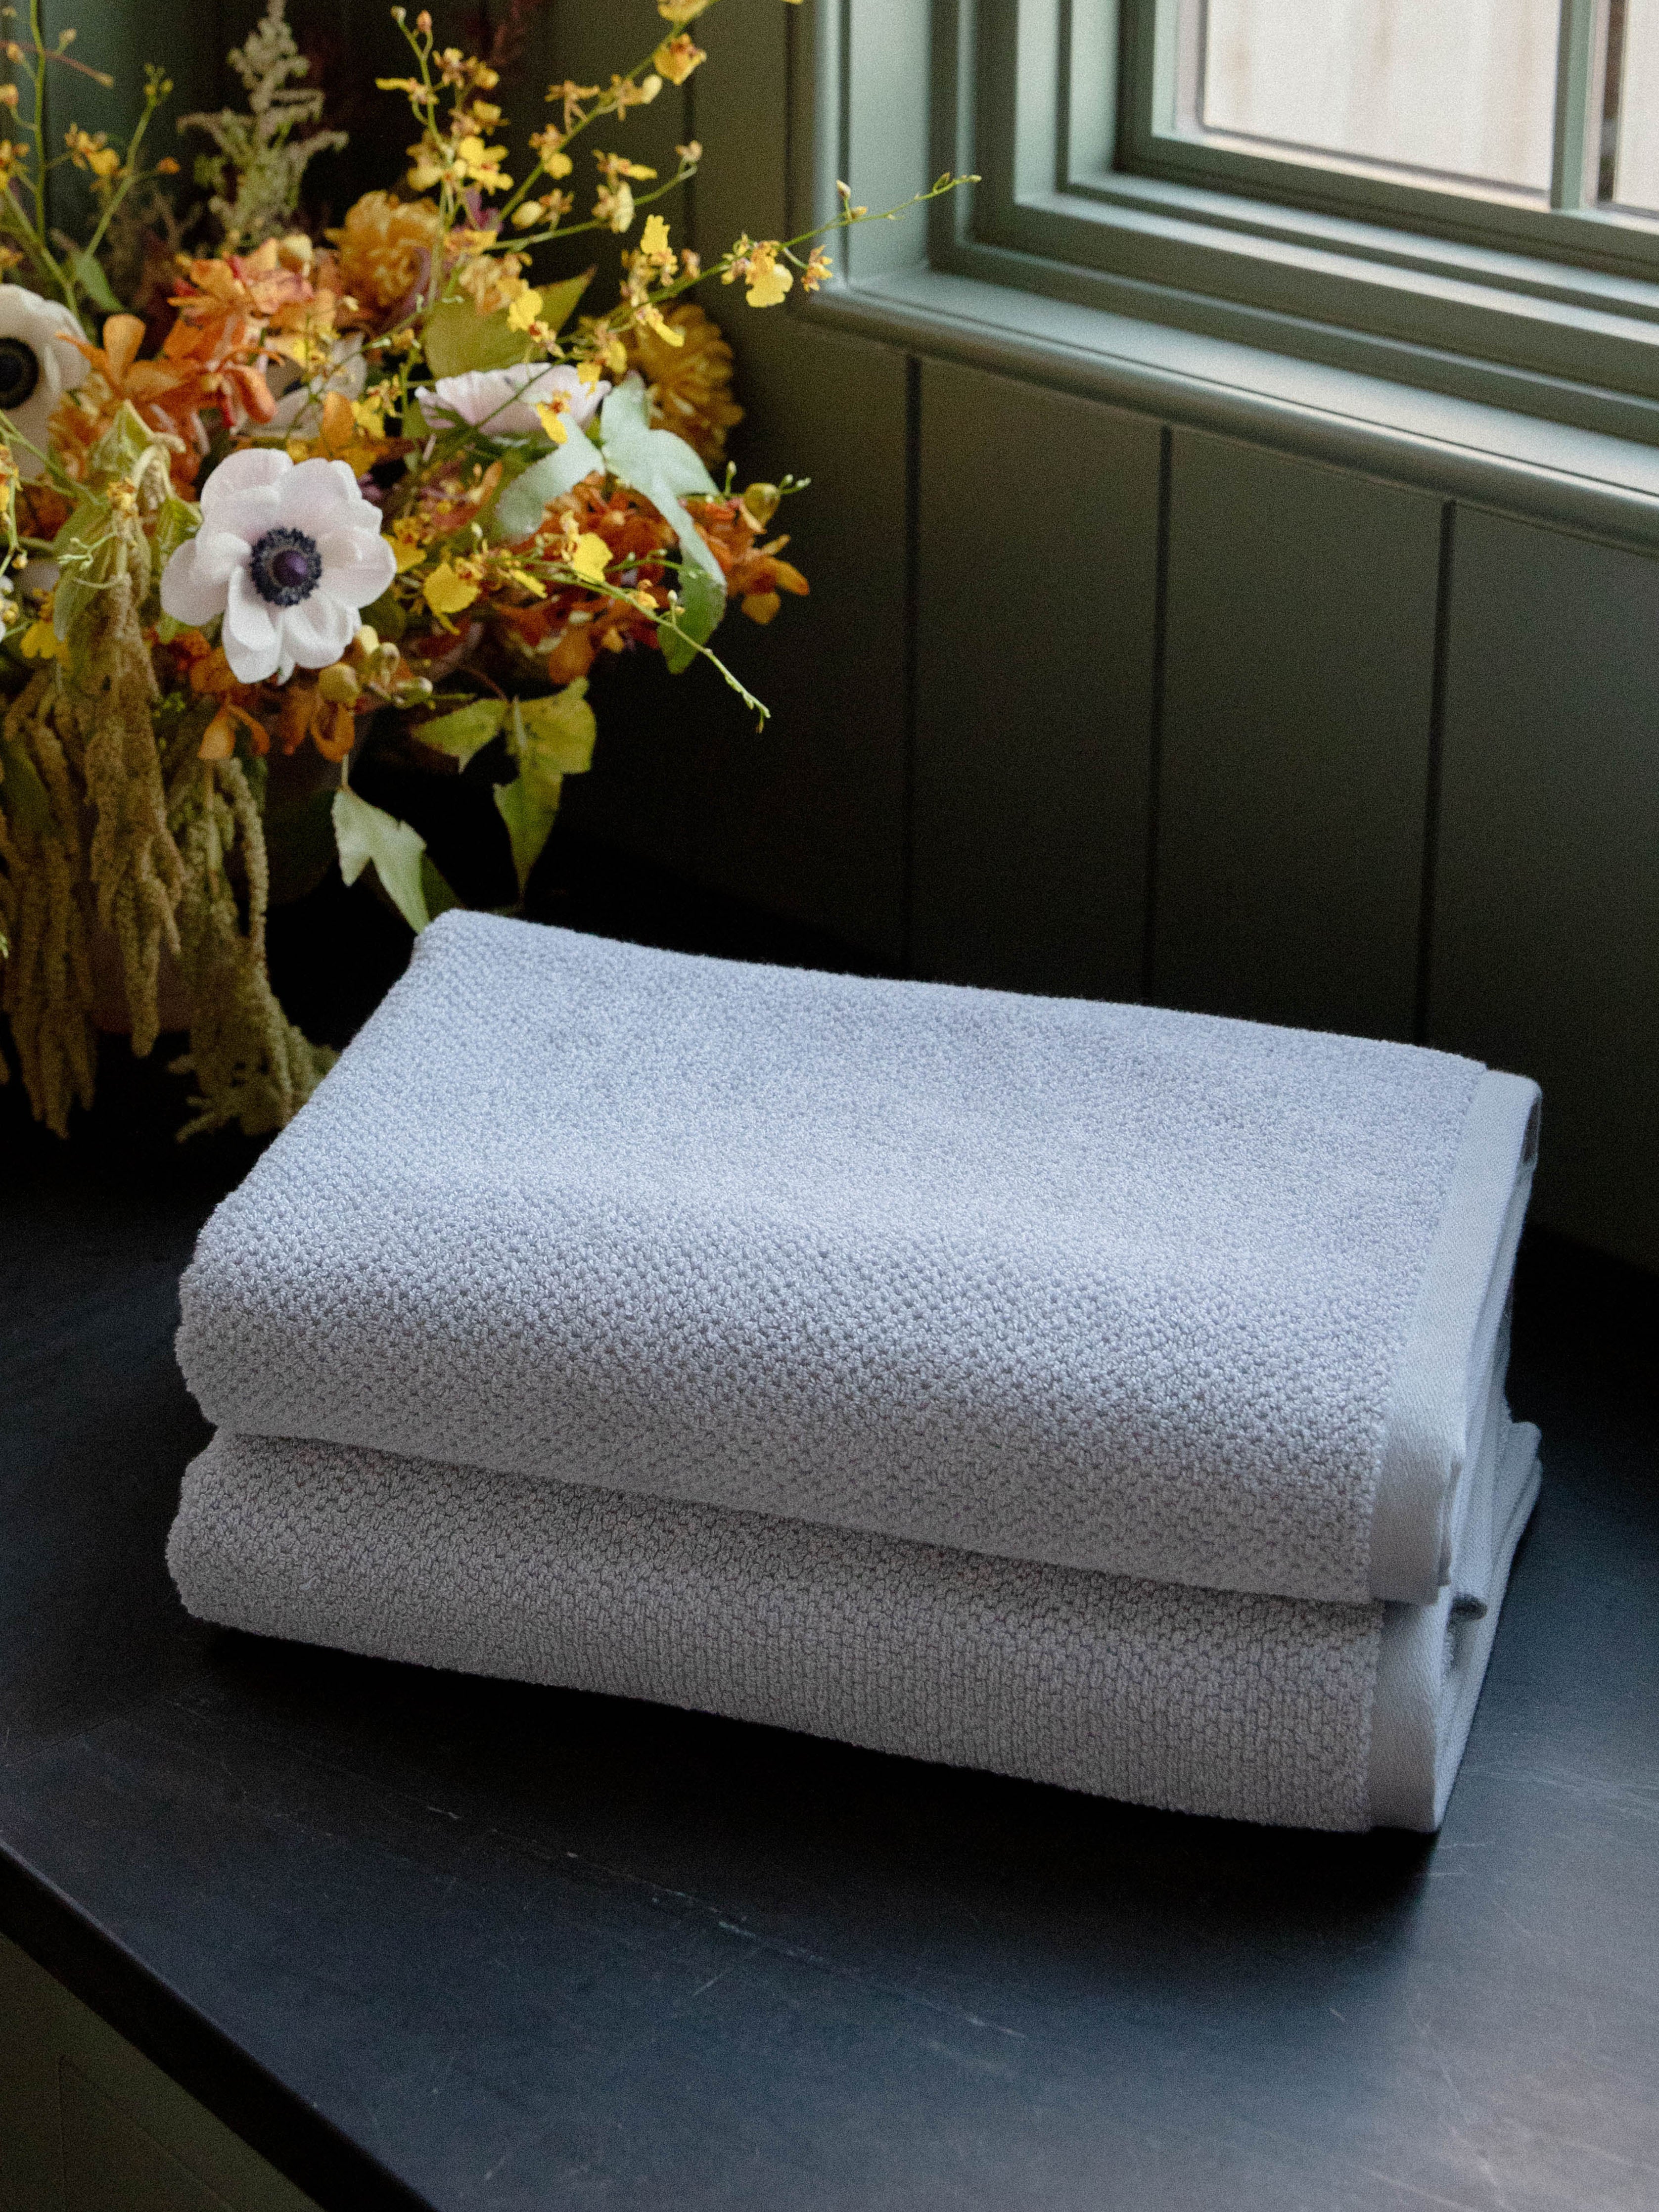 Nantucket Bath Towels in the color Heathered Harbor Mist. Photo of Nantucket Bath Towels taken with the bath towels resting on a countertop in a bathroom. |Color: Heathered Harbor Mist